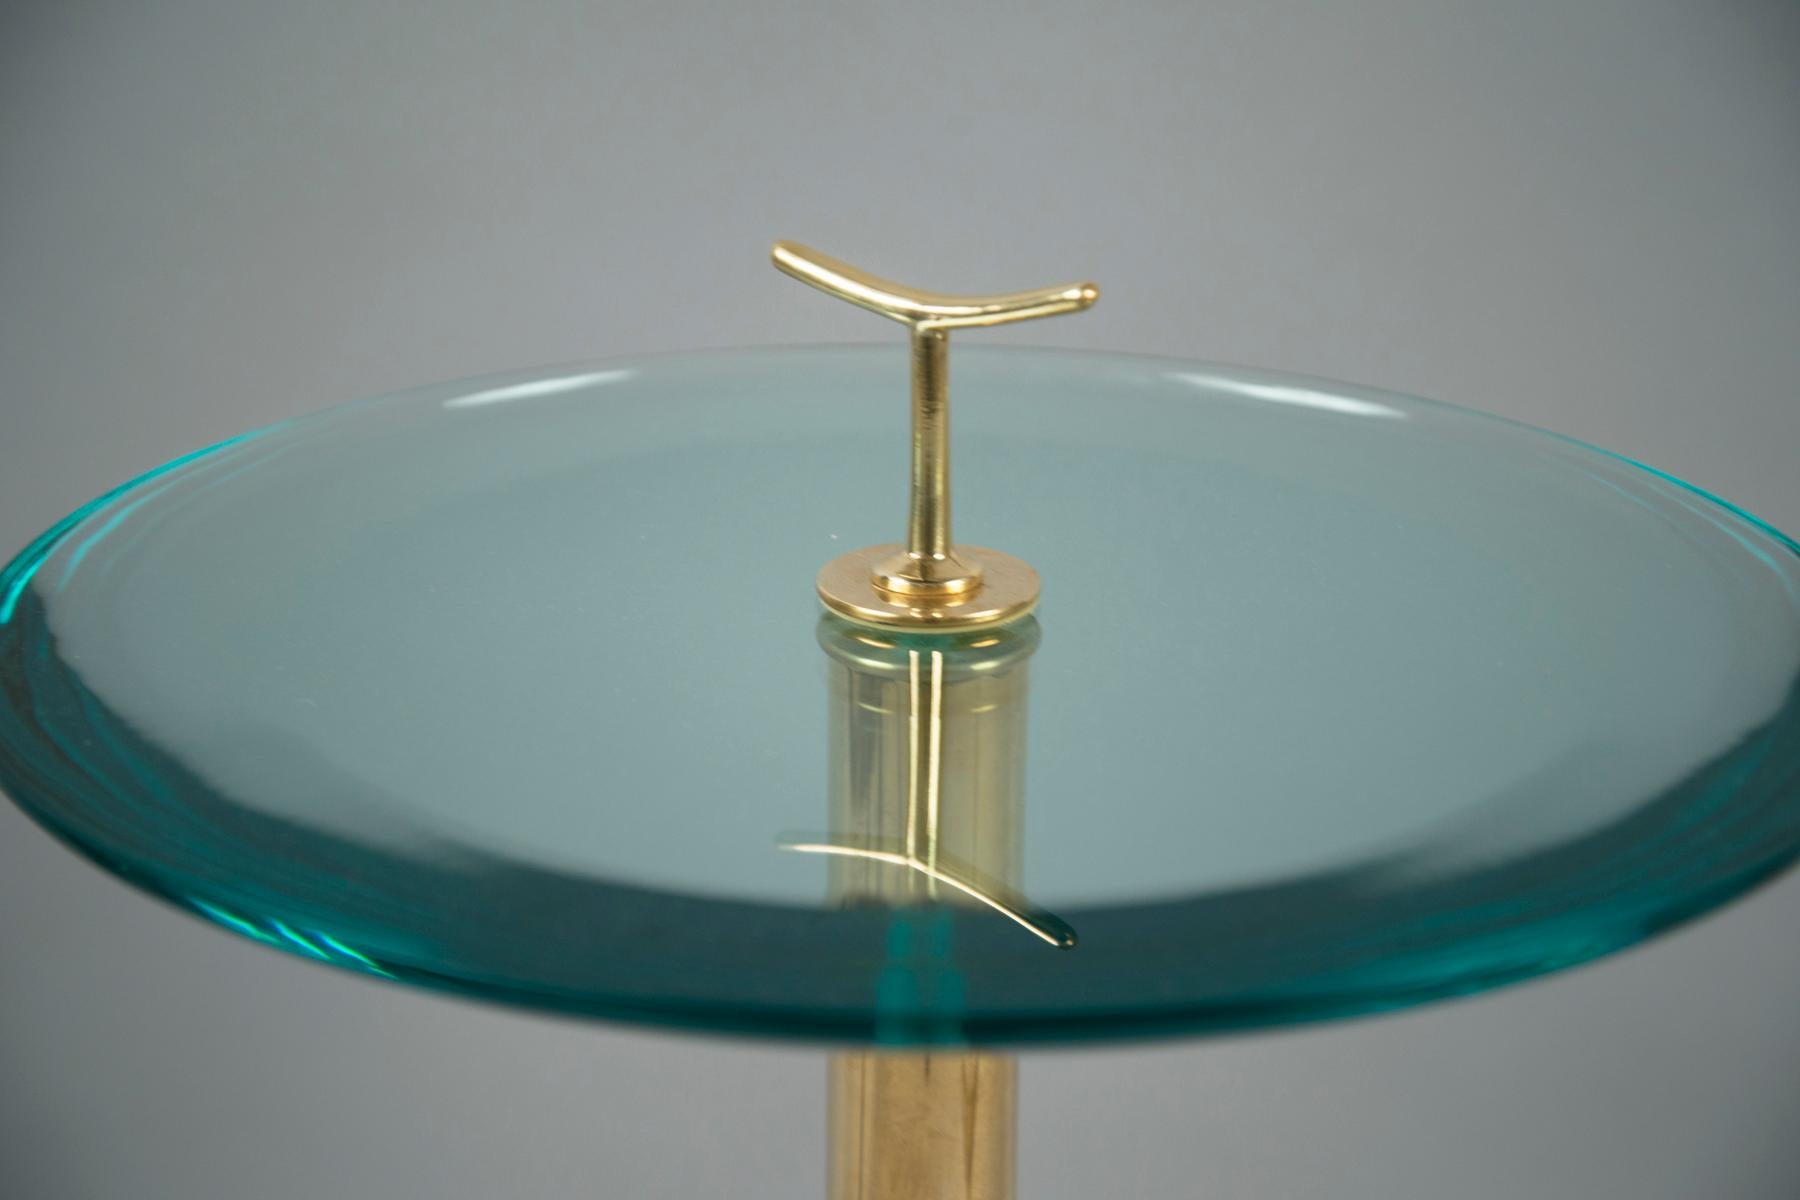 Brass stemmed side tables, each supporting a thick glass top with a green tint and a crescent shaped brass handle.

Overall height with handle: 26